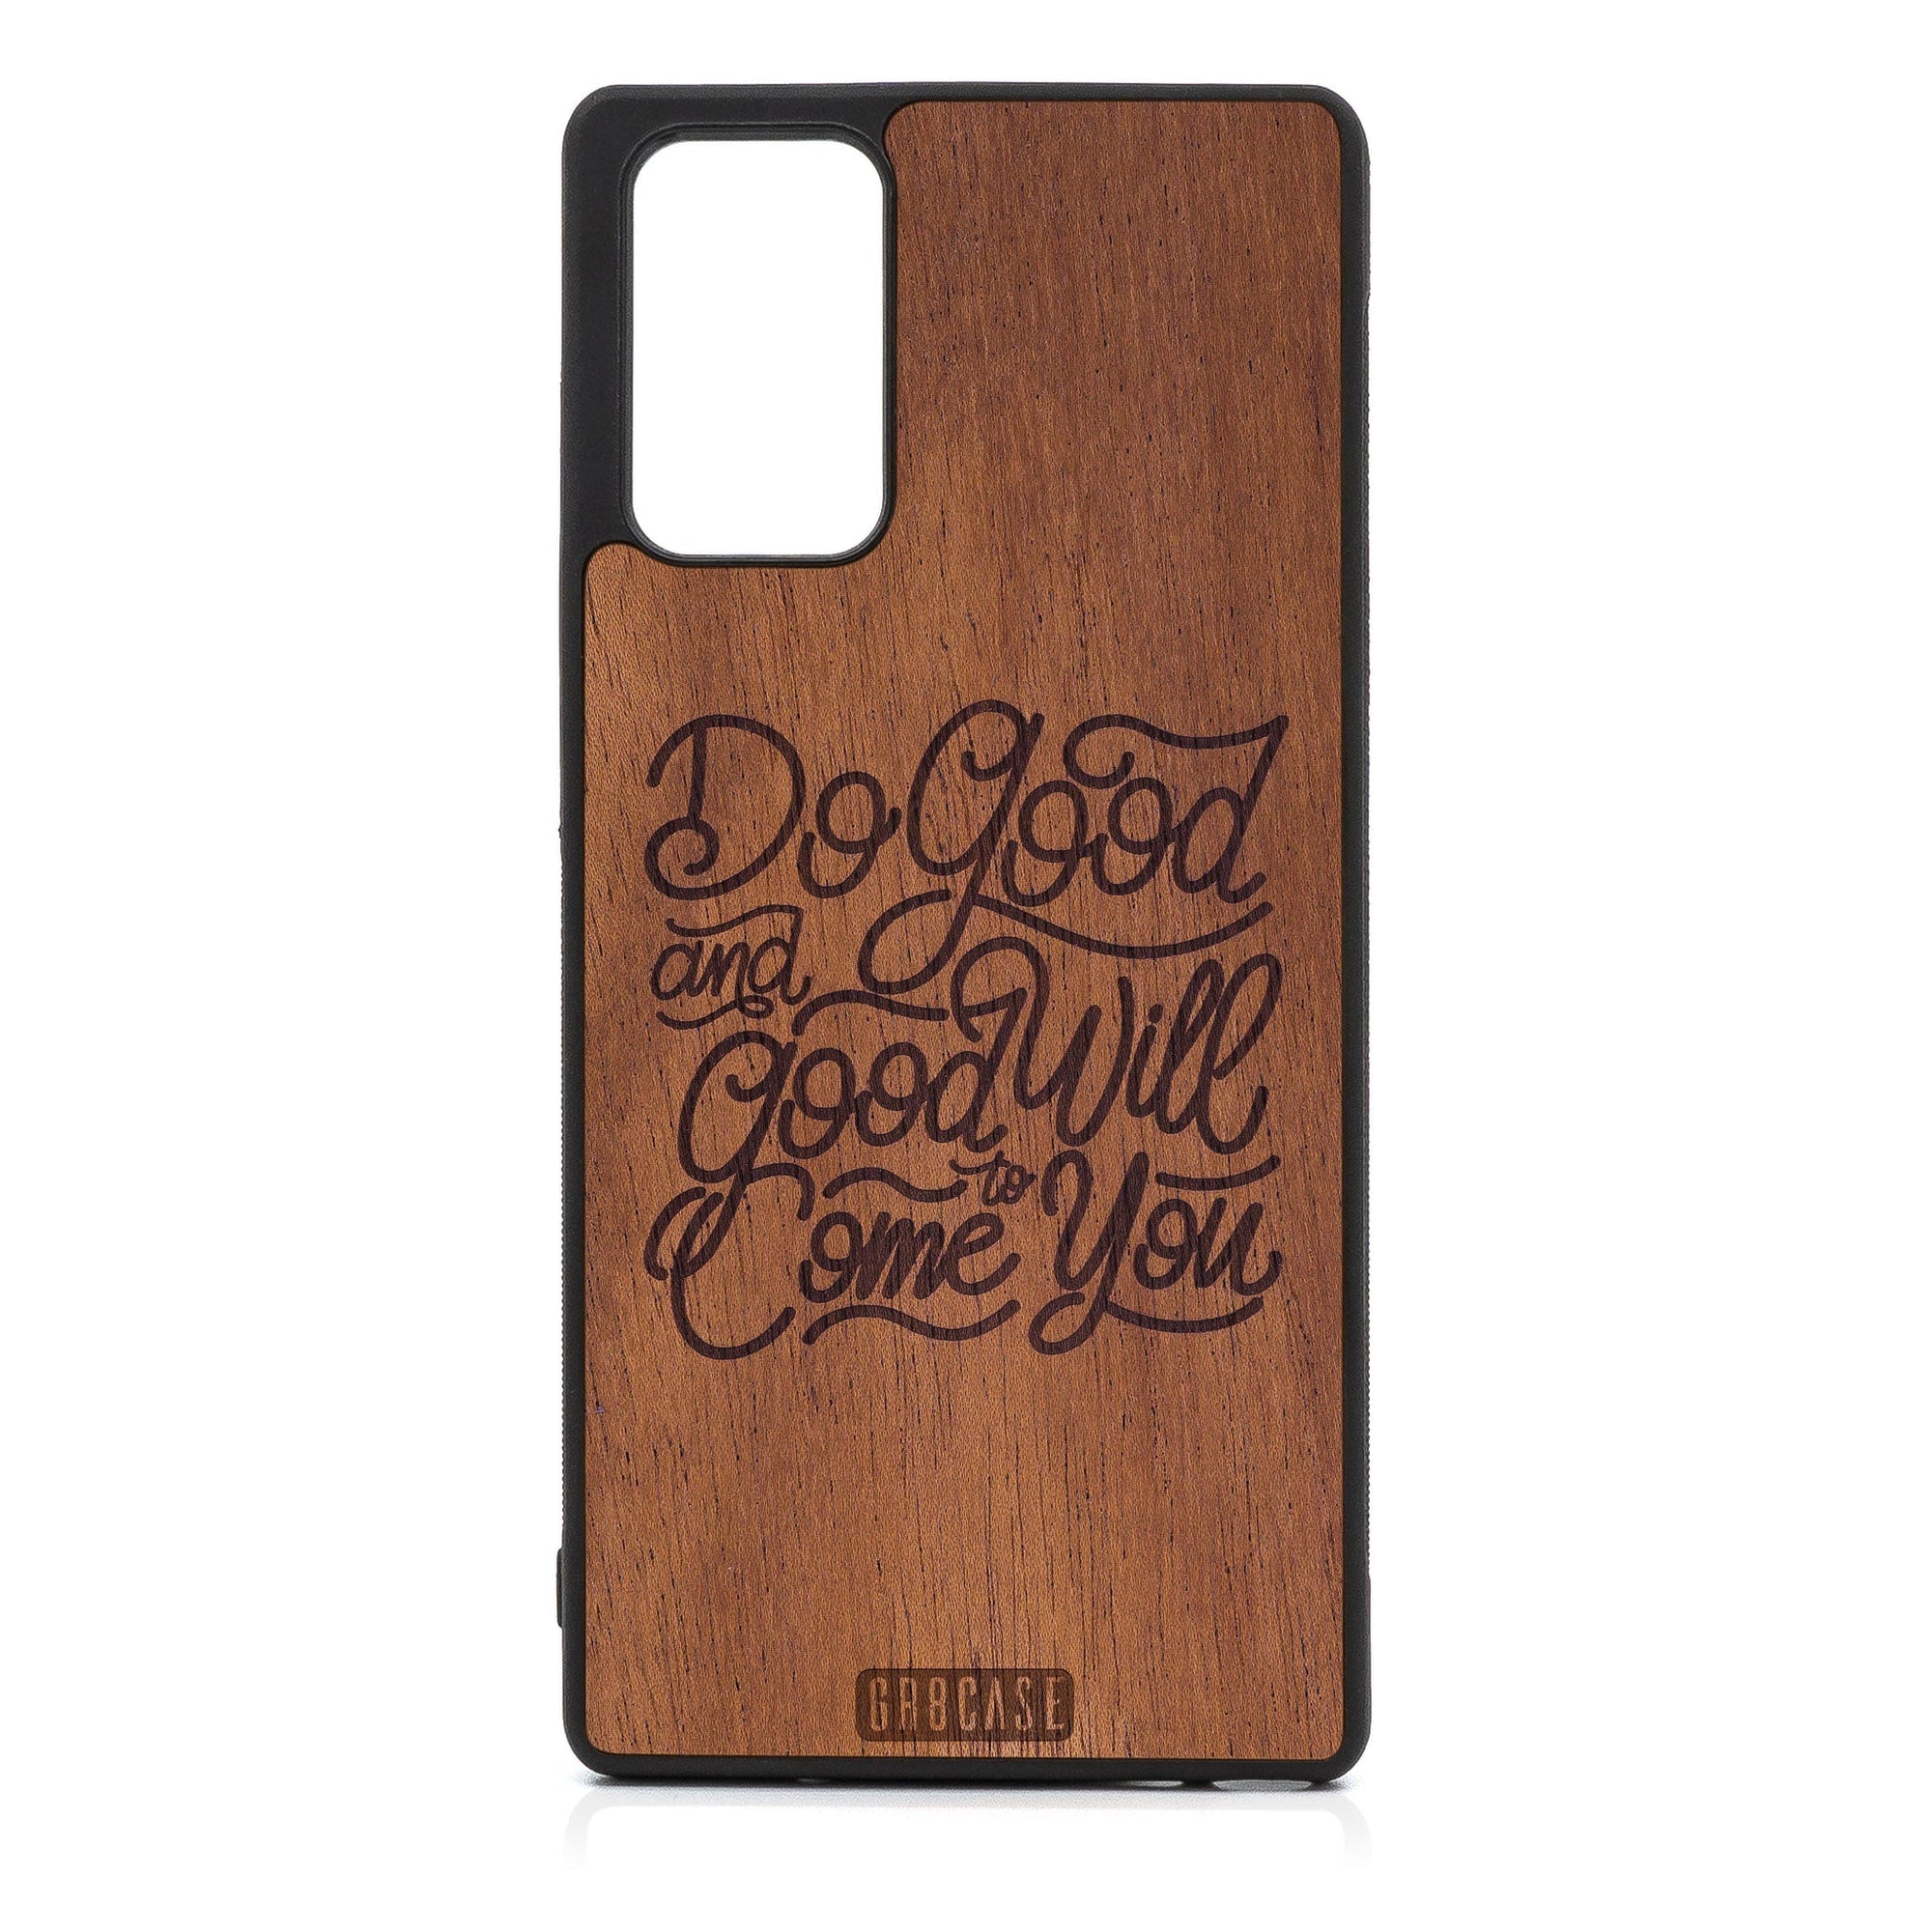 Do Good And Good Will Come To You Design Wood Case For Samsung Galaxy A53 5G